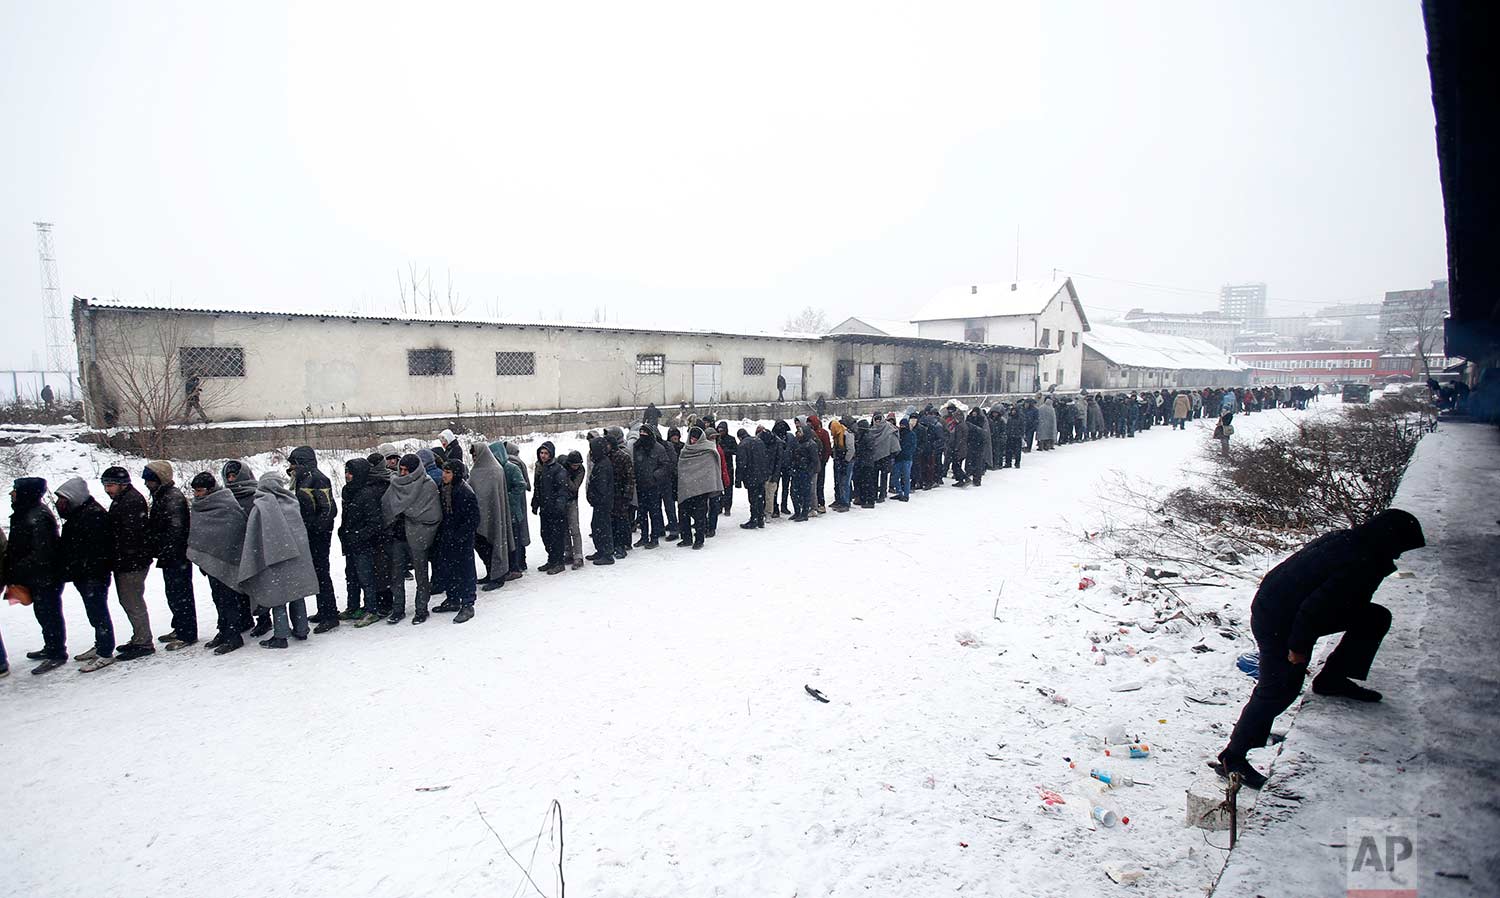  In this Tuesday, Jan. 10, 2017 photo, migrants queue for food in front of an abandoned warehouse in Belgrade, Serbia. Hundreds of migrants are sleeping rough in parks and make-shift shelters in the Serbian capital in freezing temperatures waiting fo